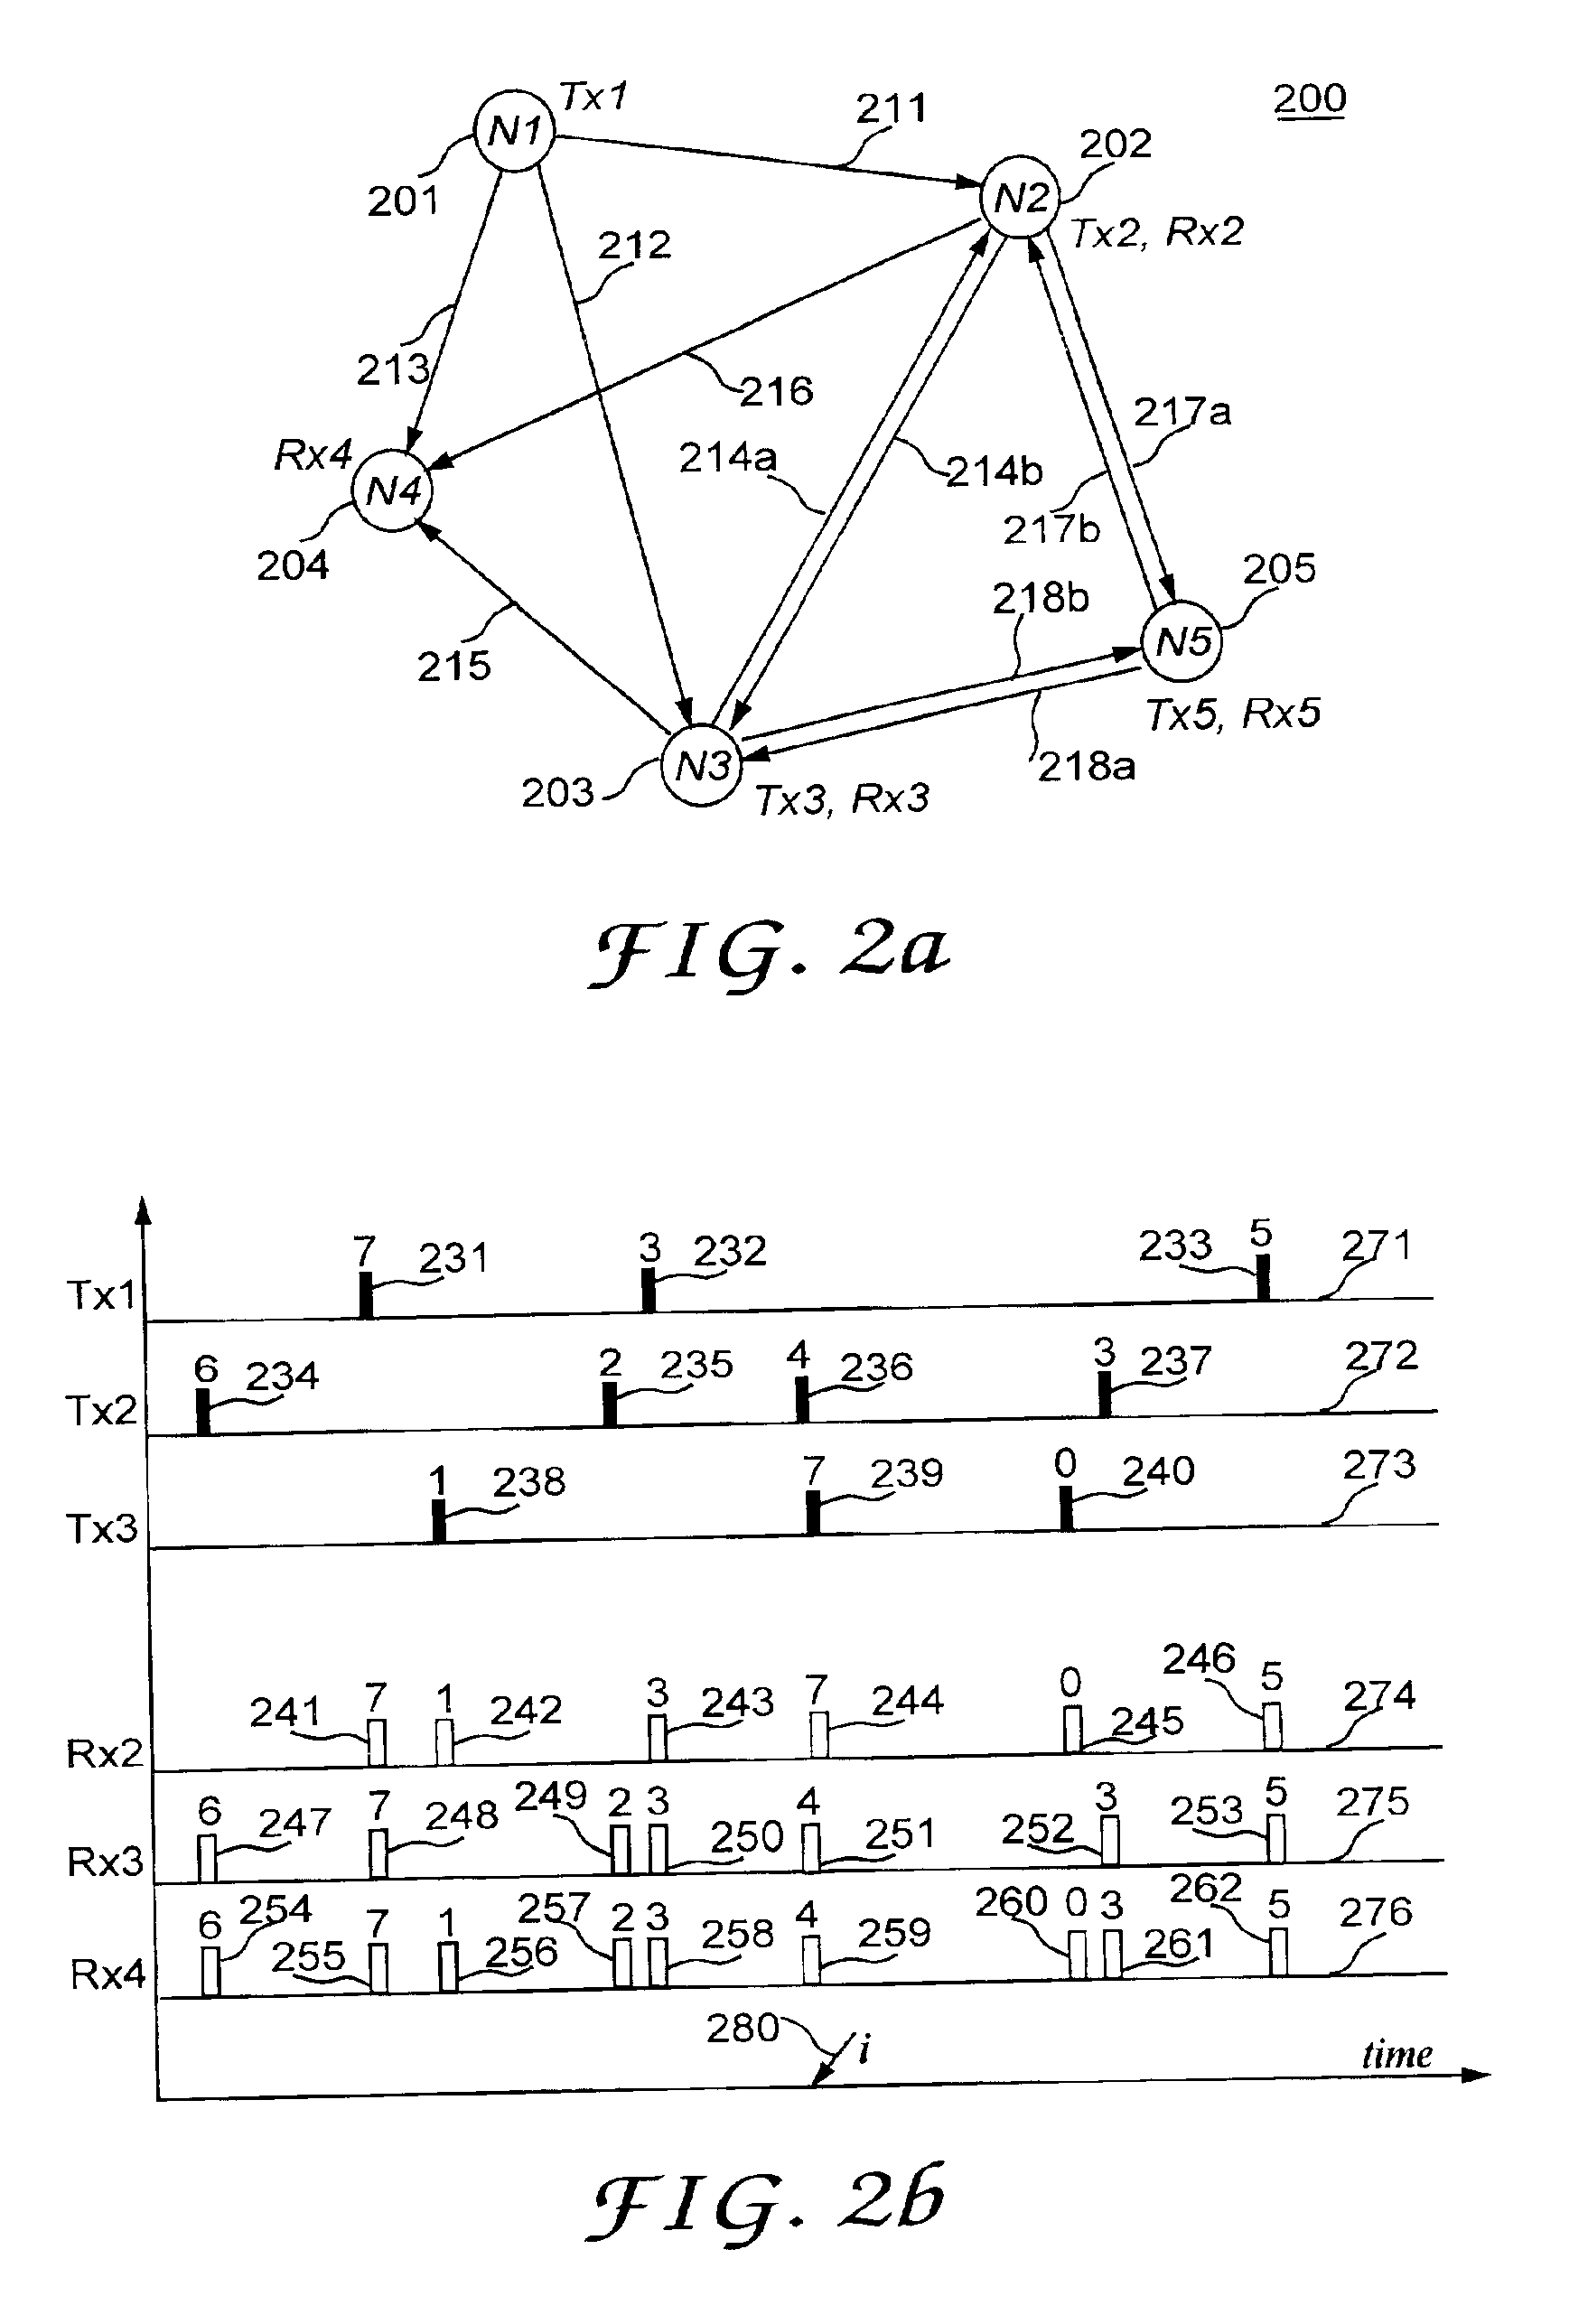 Synchronization and access of the nodes in a communications network